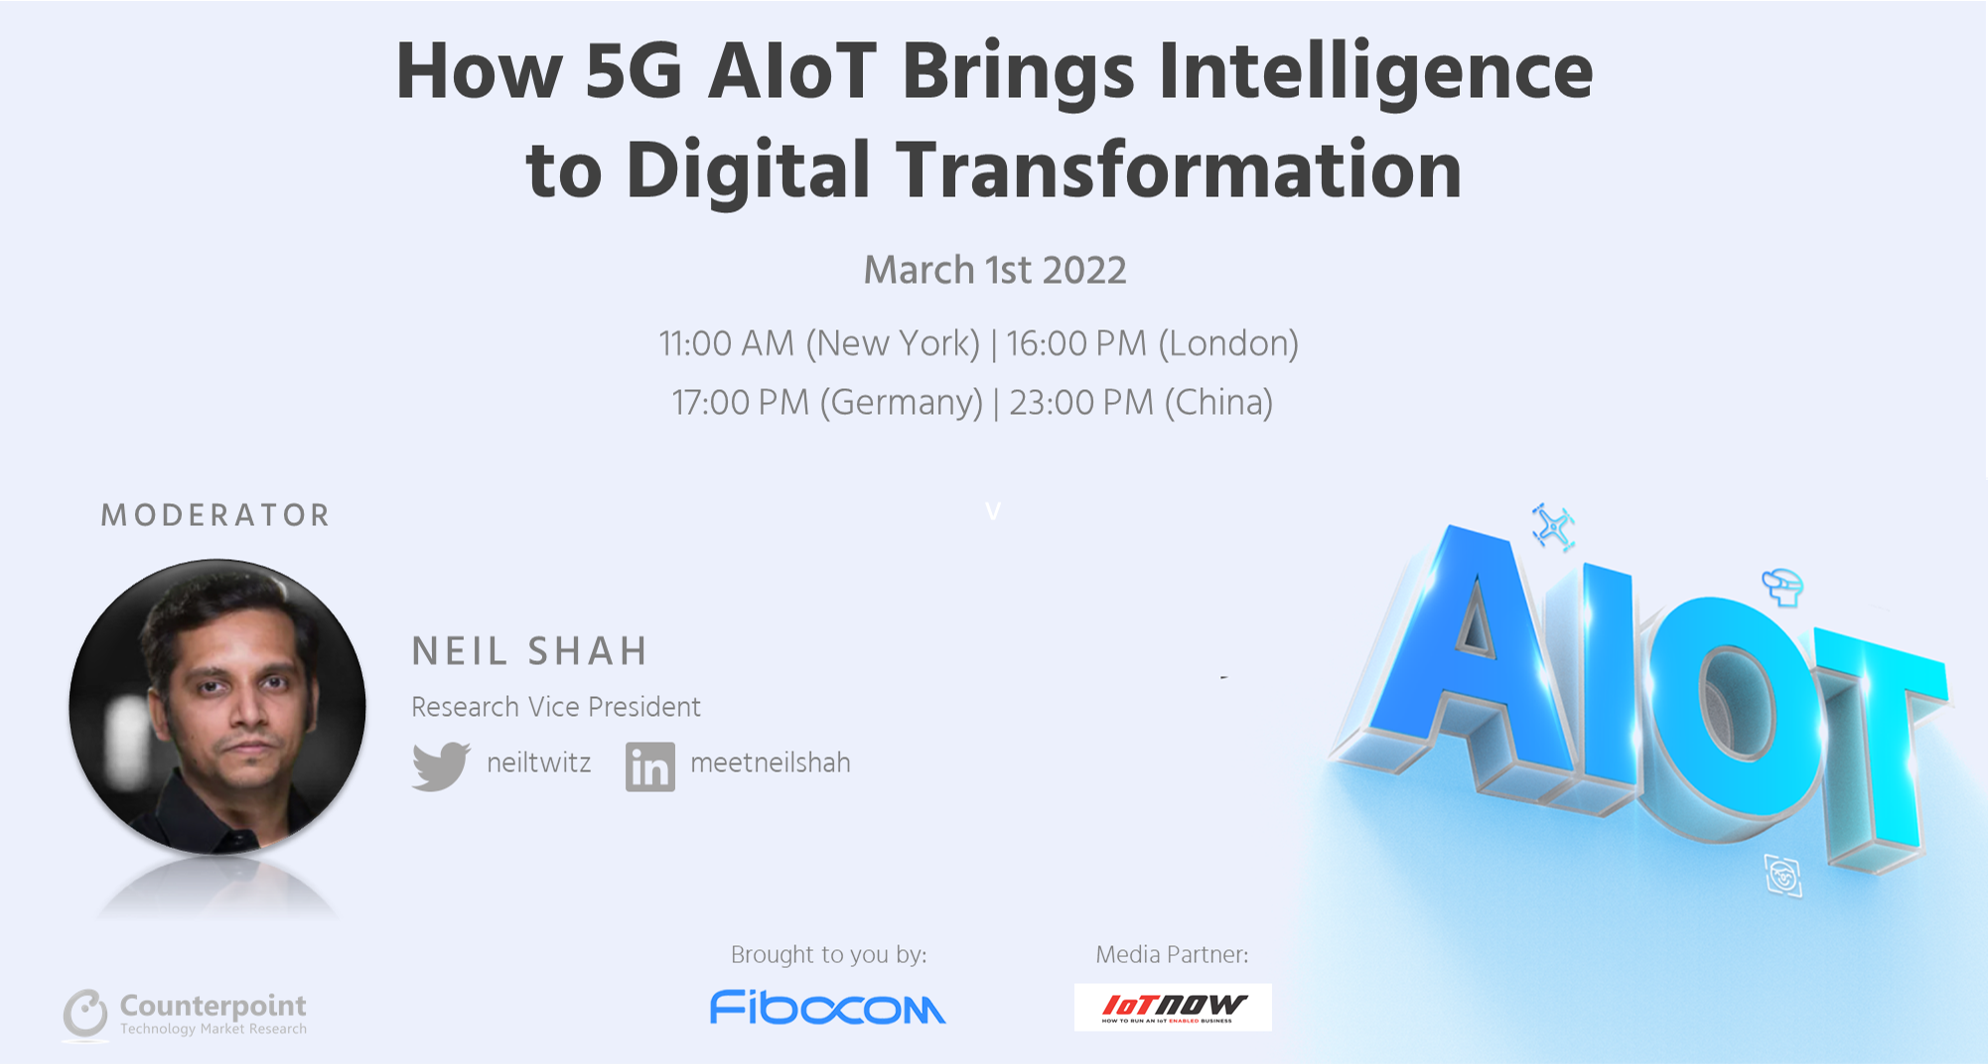 How 5G AIoT Brings Intelligence to Digital Transformation